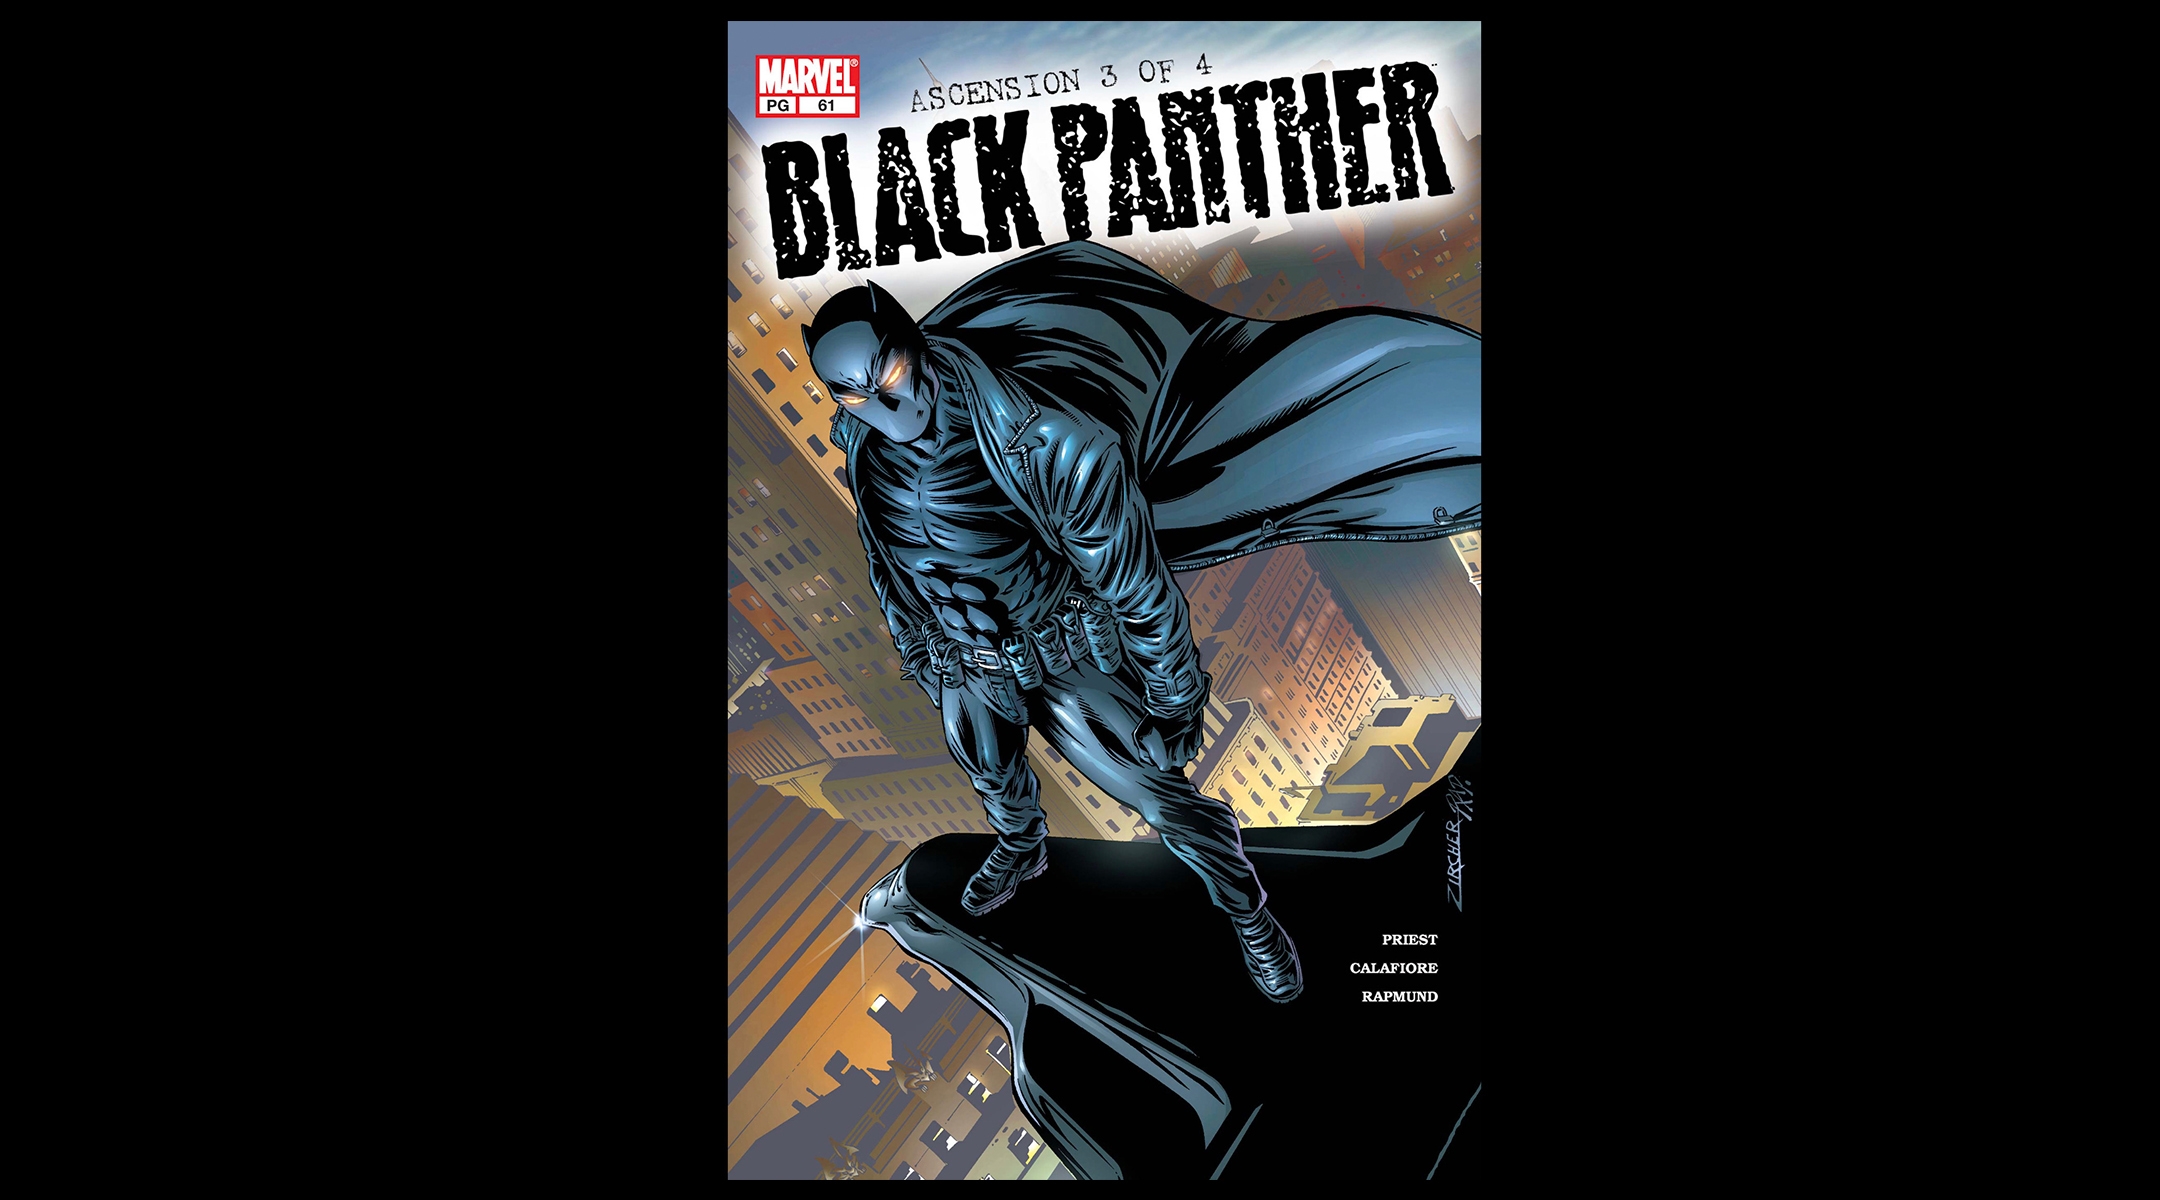 Kevin “Kasper” Cole temporarily succeeded T’challa, the original Black Panther. (Marvel Comics)